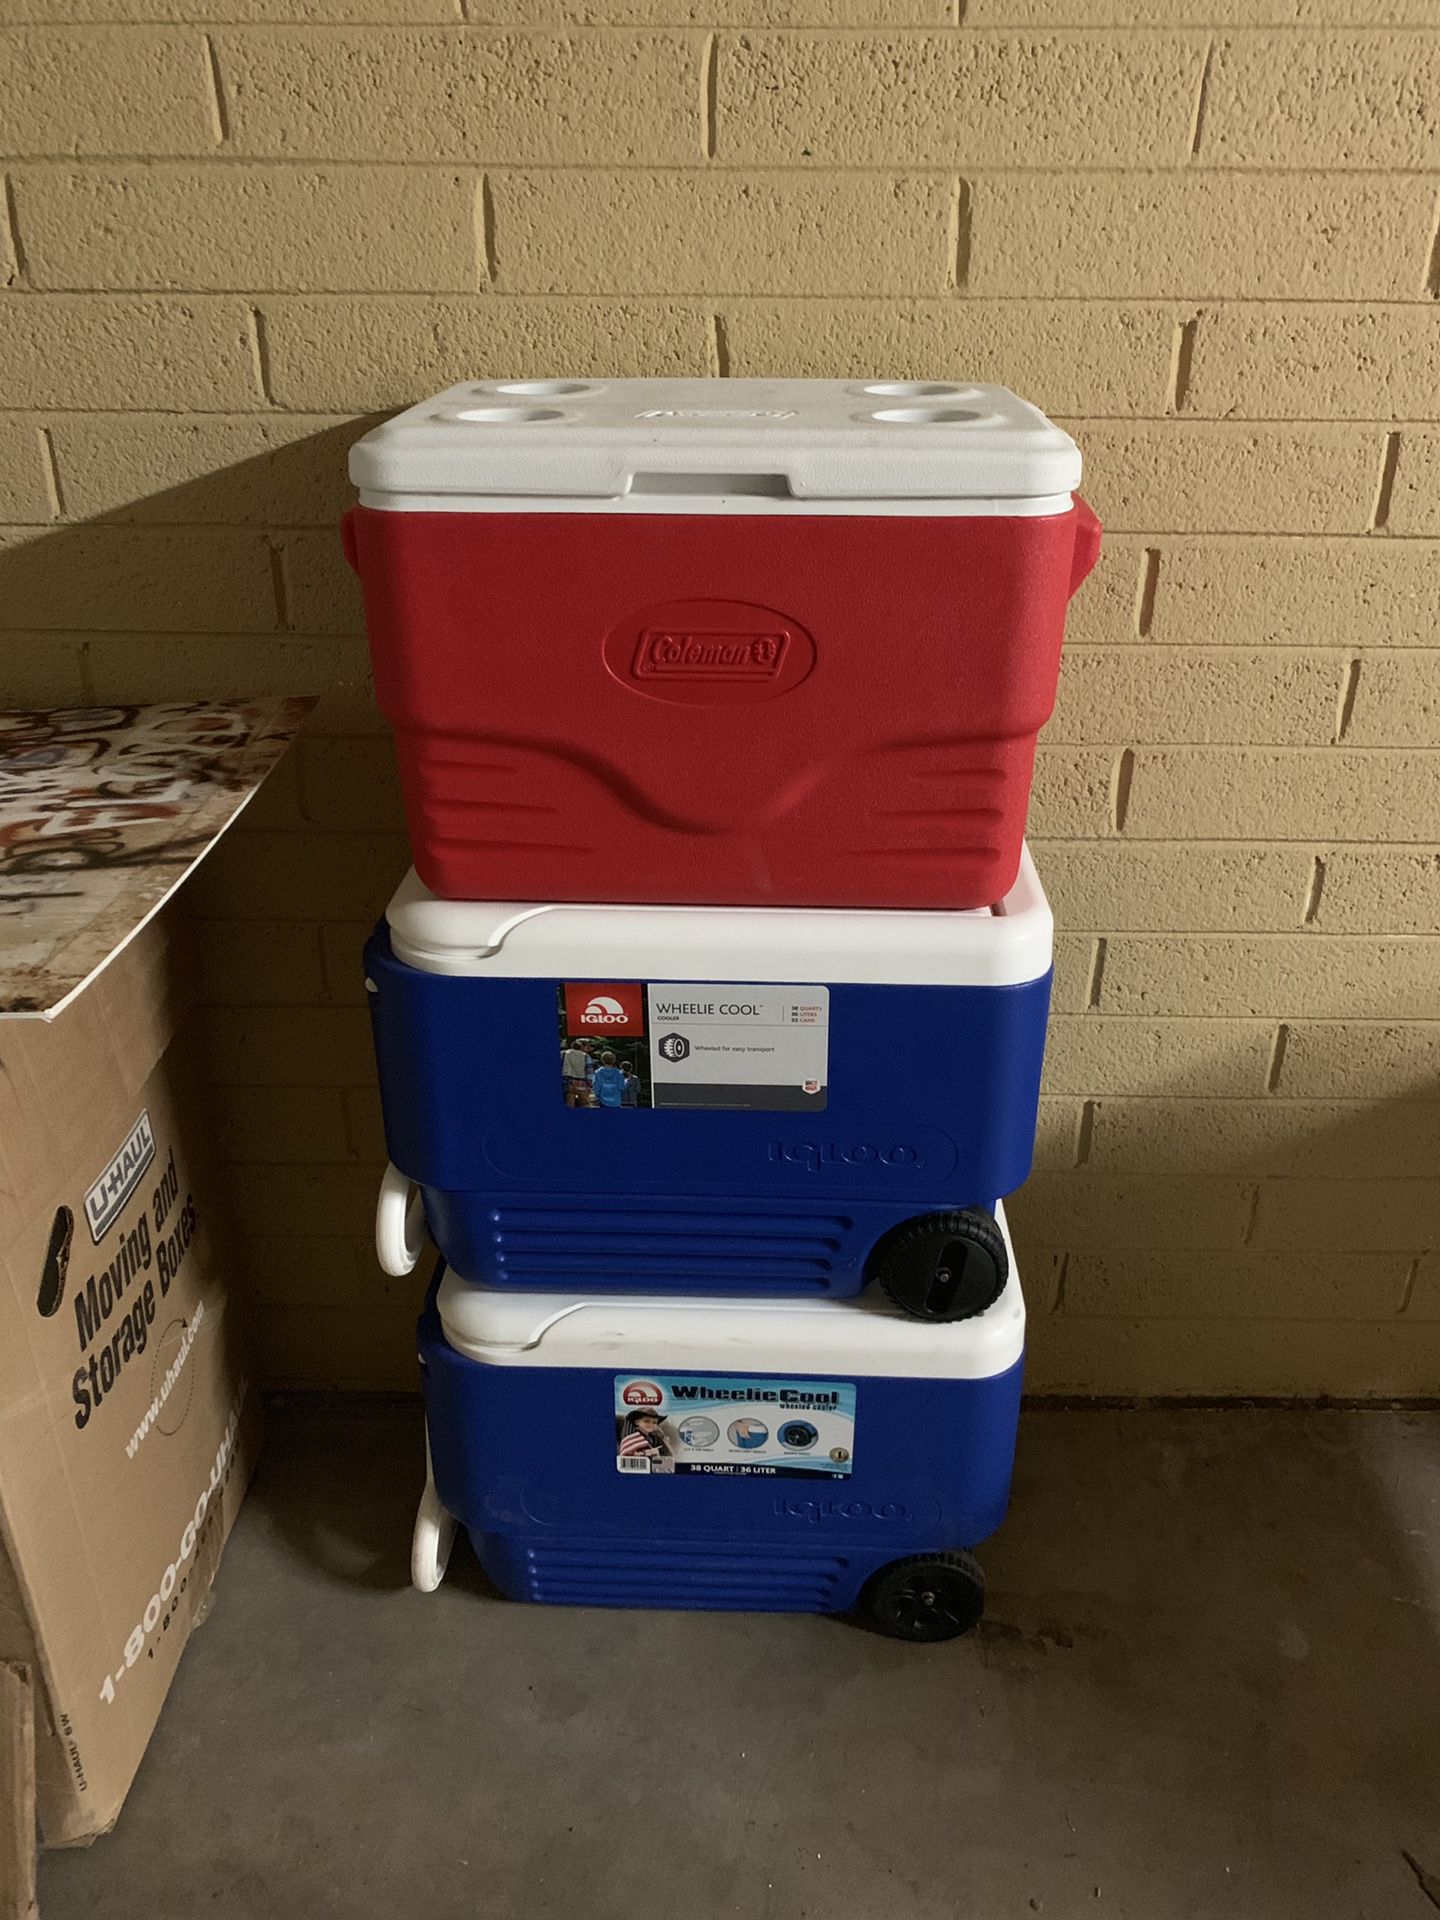 2 igloo rolling coolers and 1 coleman